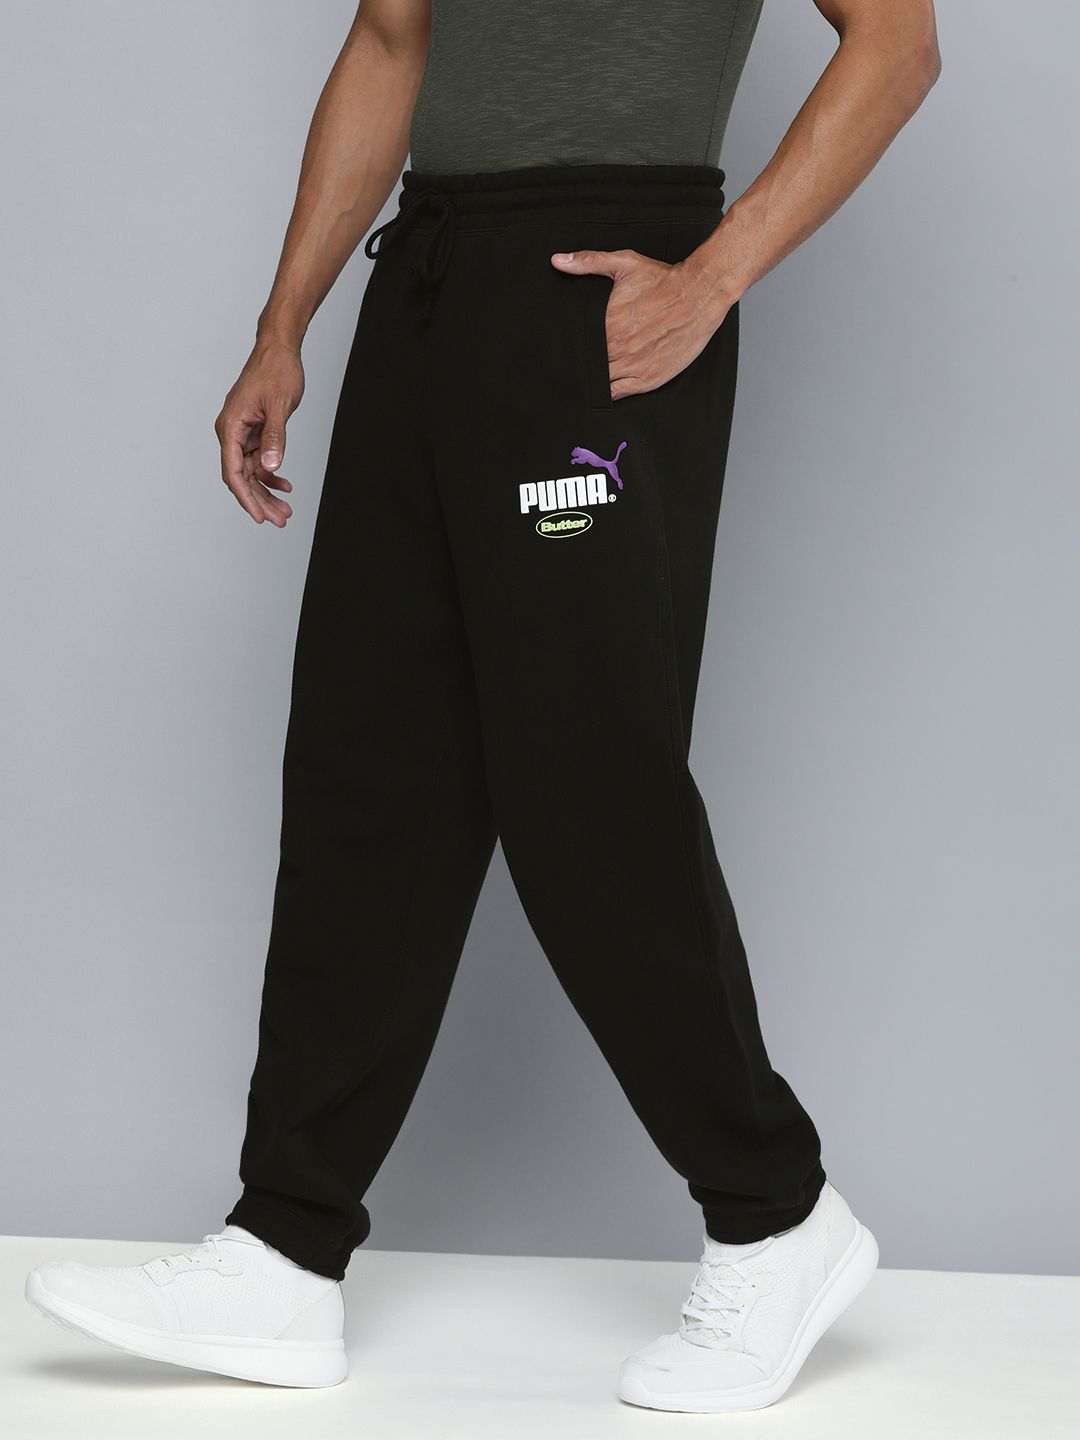 PUMA x Butter Goods Unisex Black Solid Loose Sweat Pants Price in India